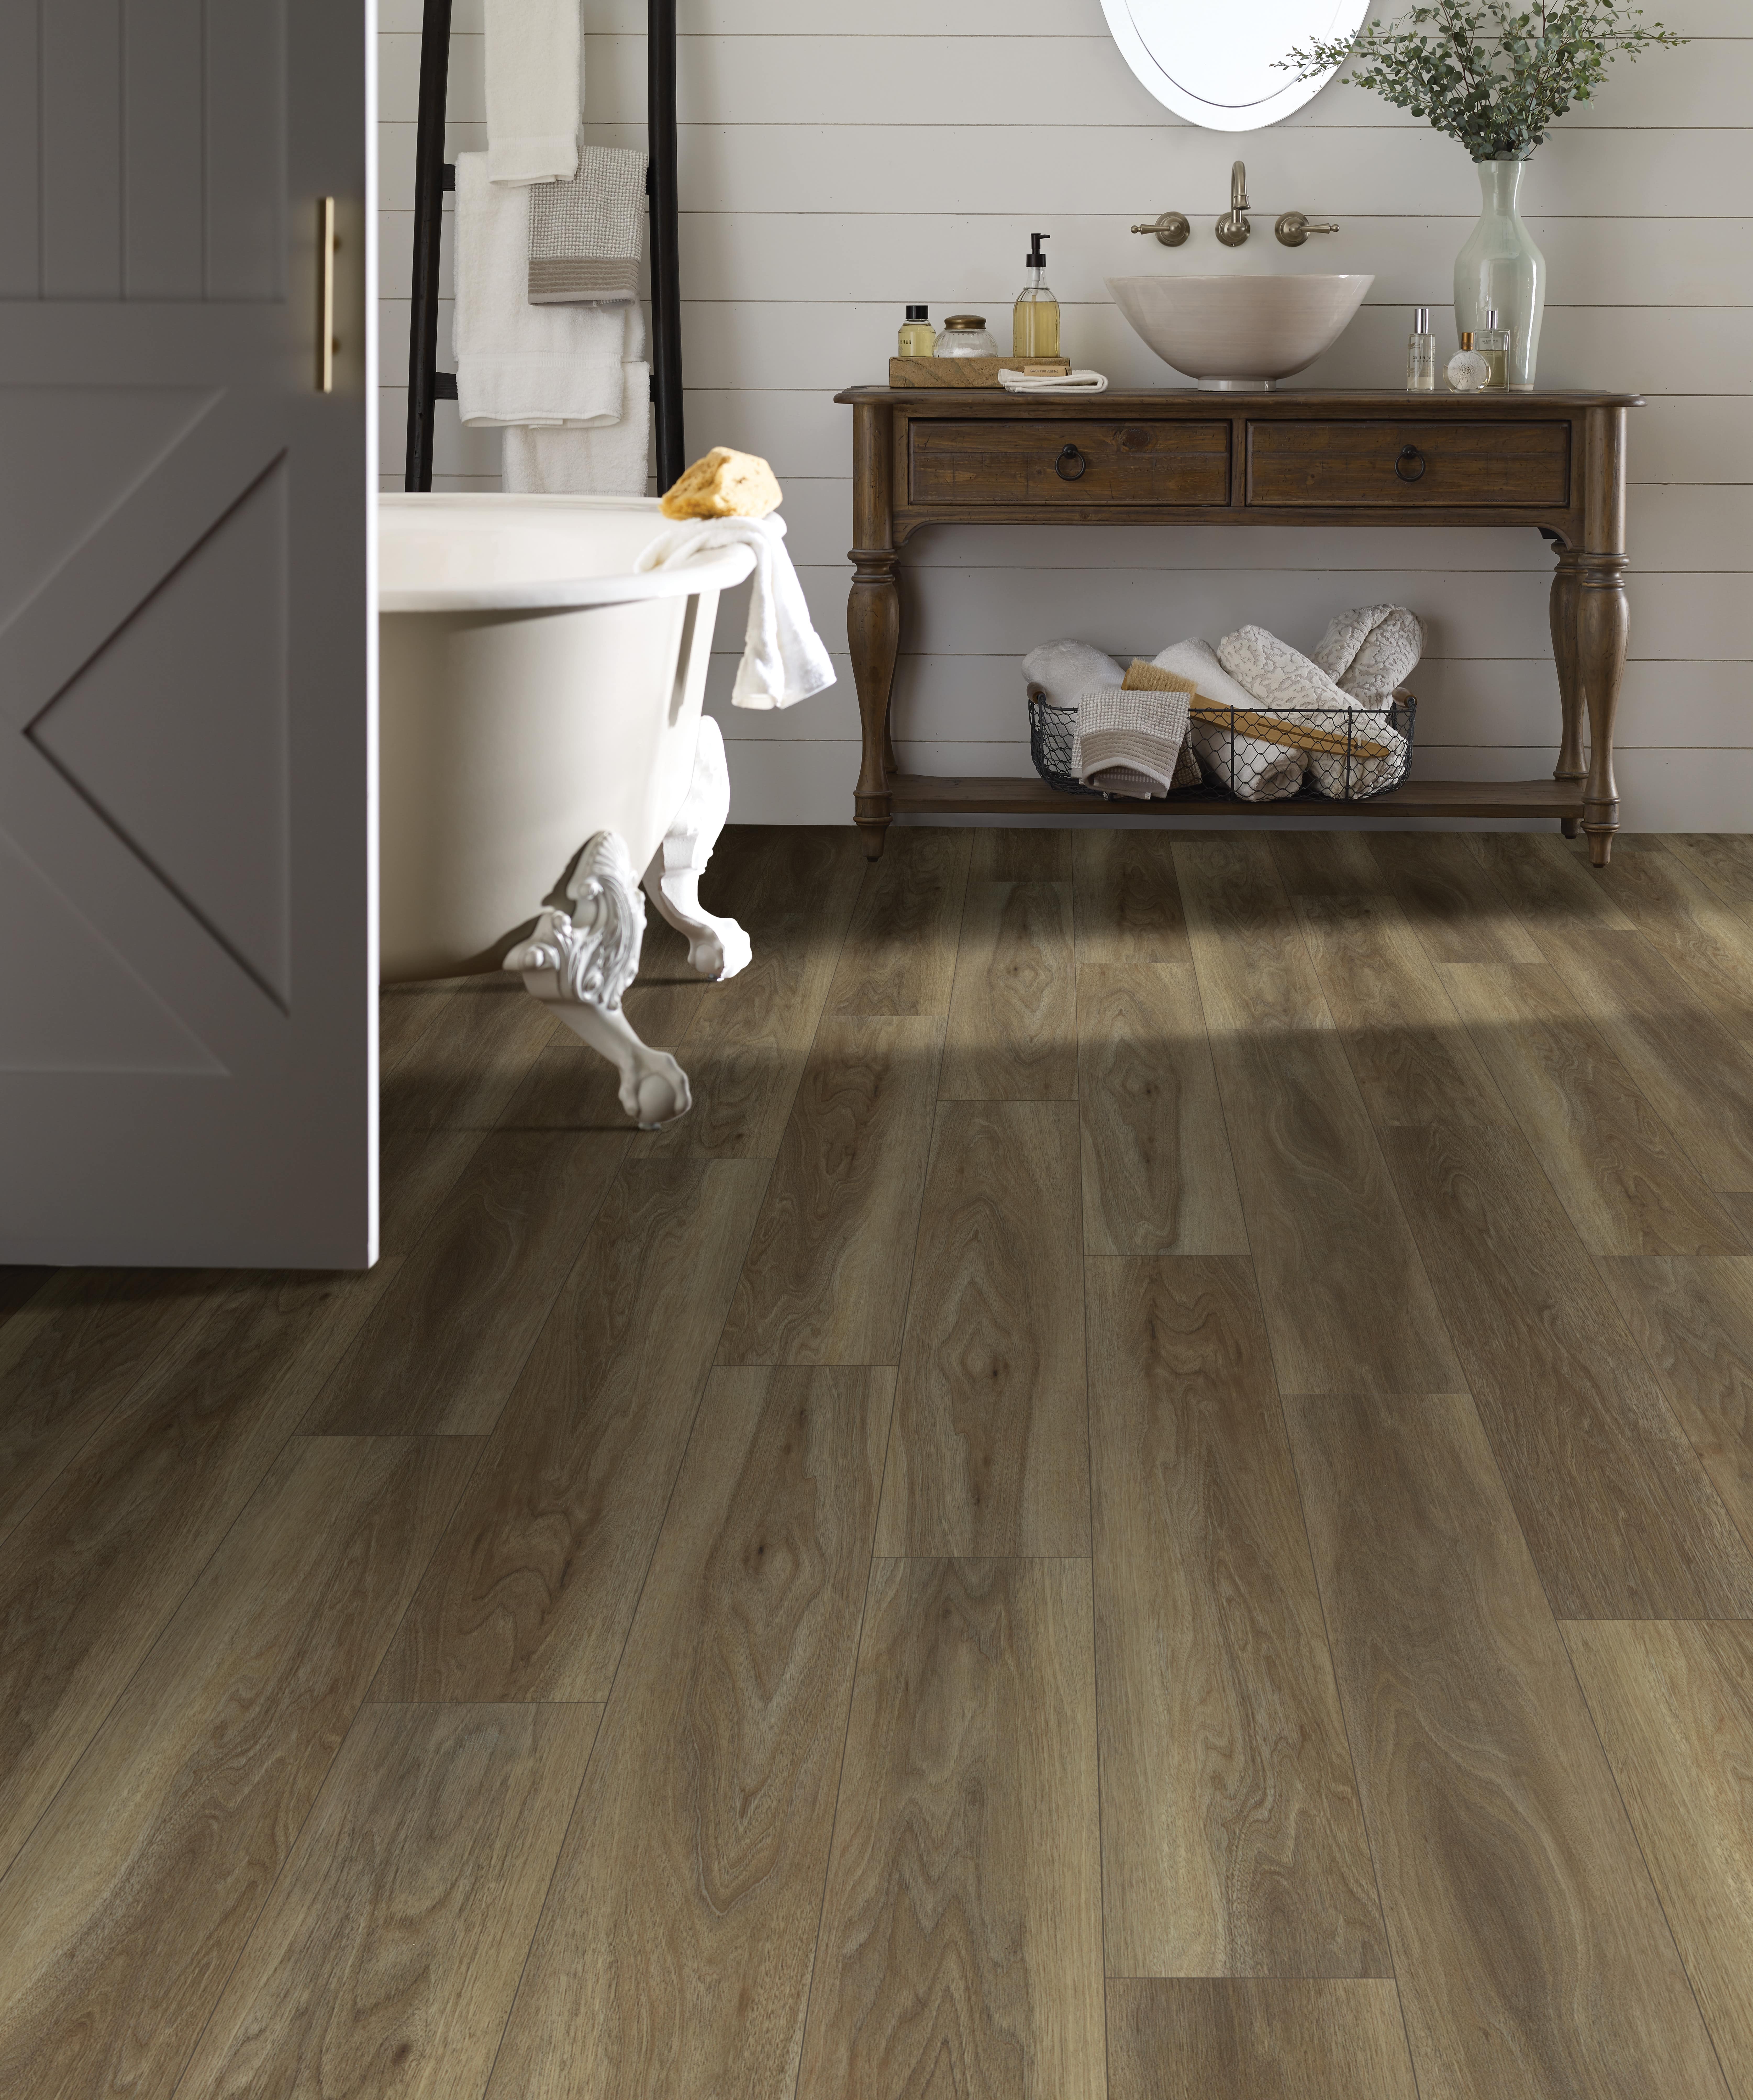 Wood Floor Bathrooms How To Do Them, Which Way Do You Lay Laminate Flooring In A Small Bathroom